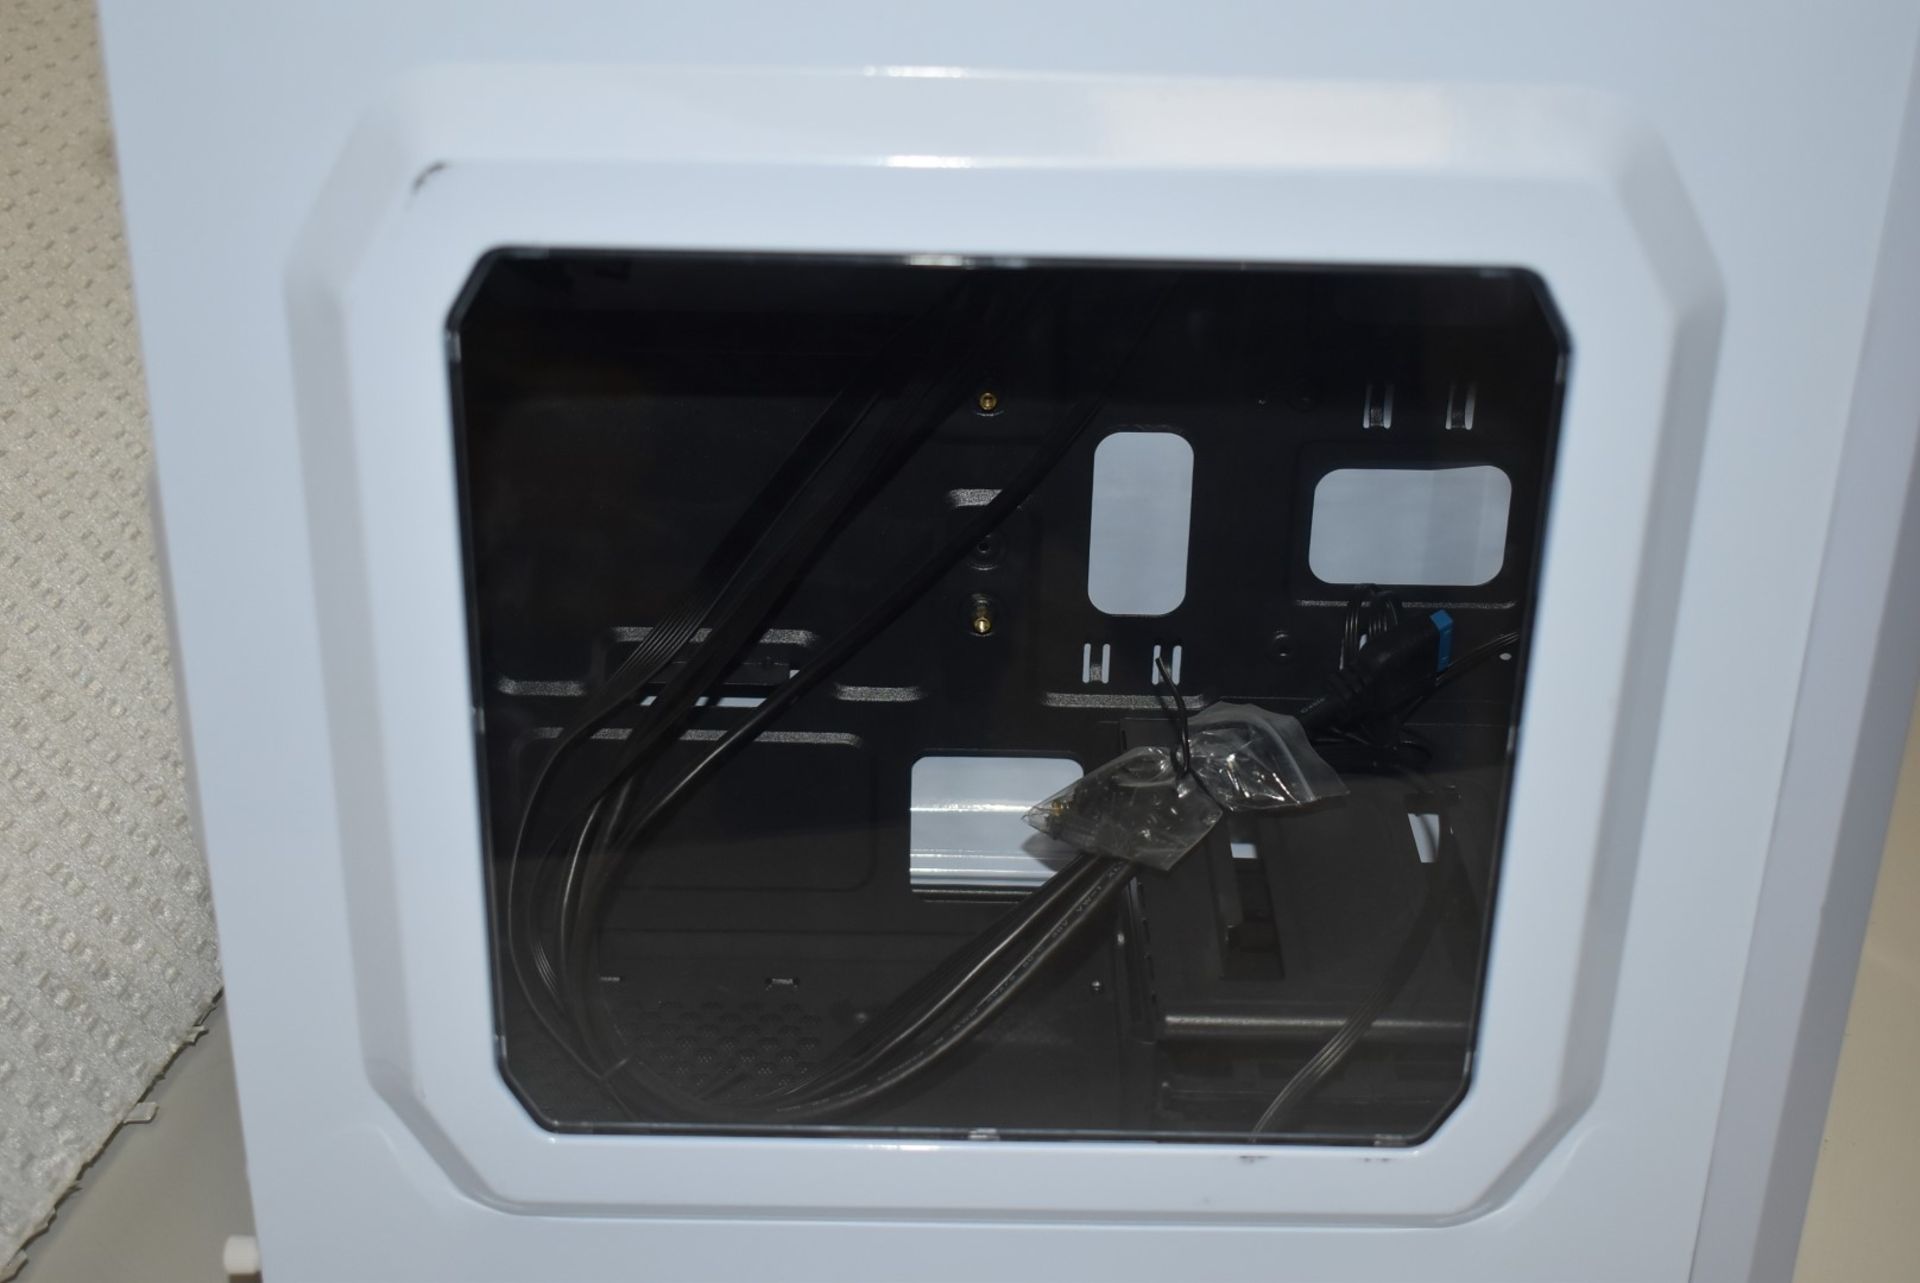 5 x ATX Computer Cases With USB 3.0, SD Card Readers, Side Window and Case Fan - Image 4 of 8